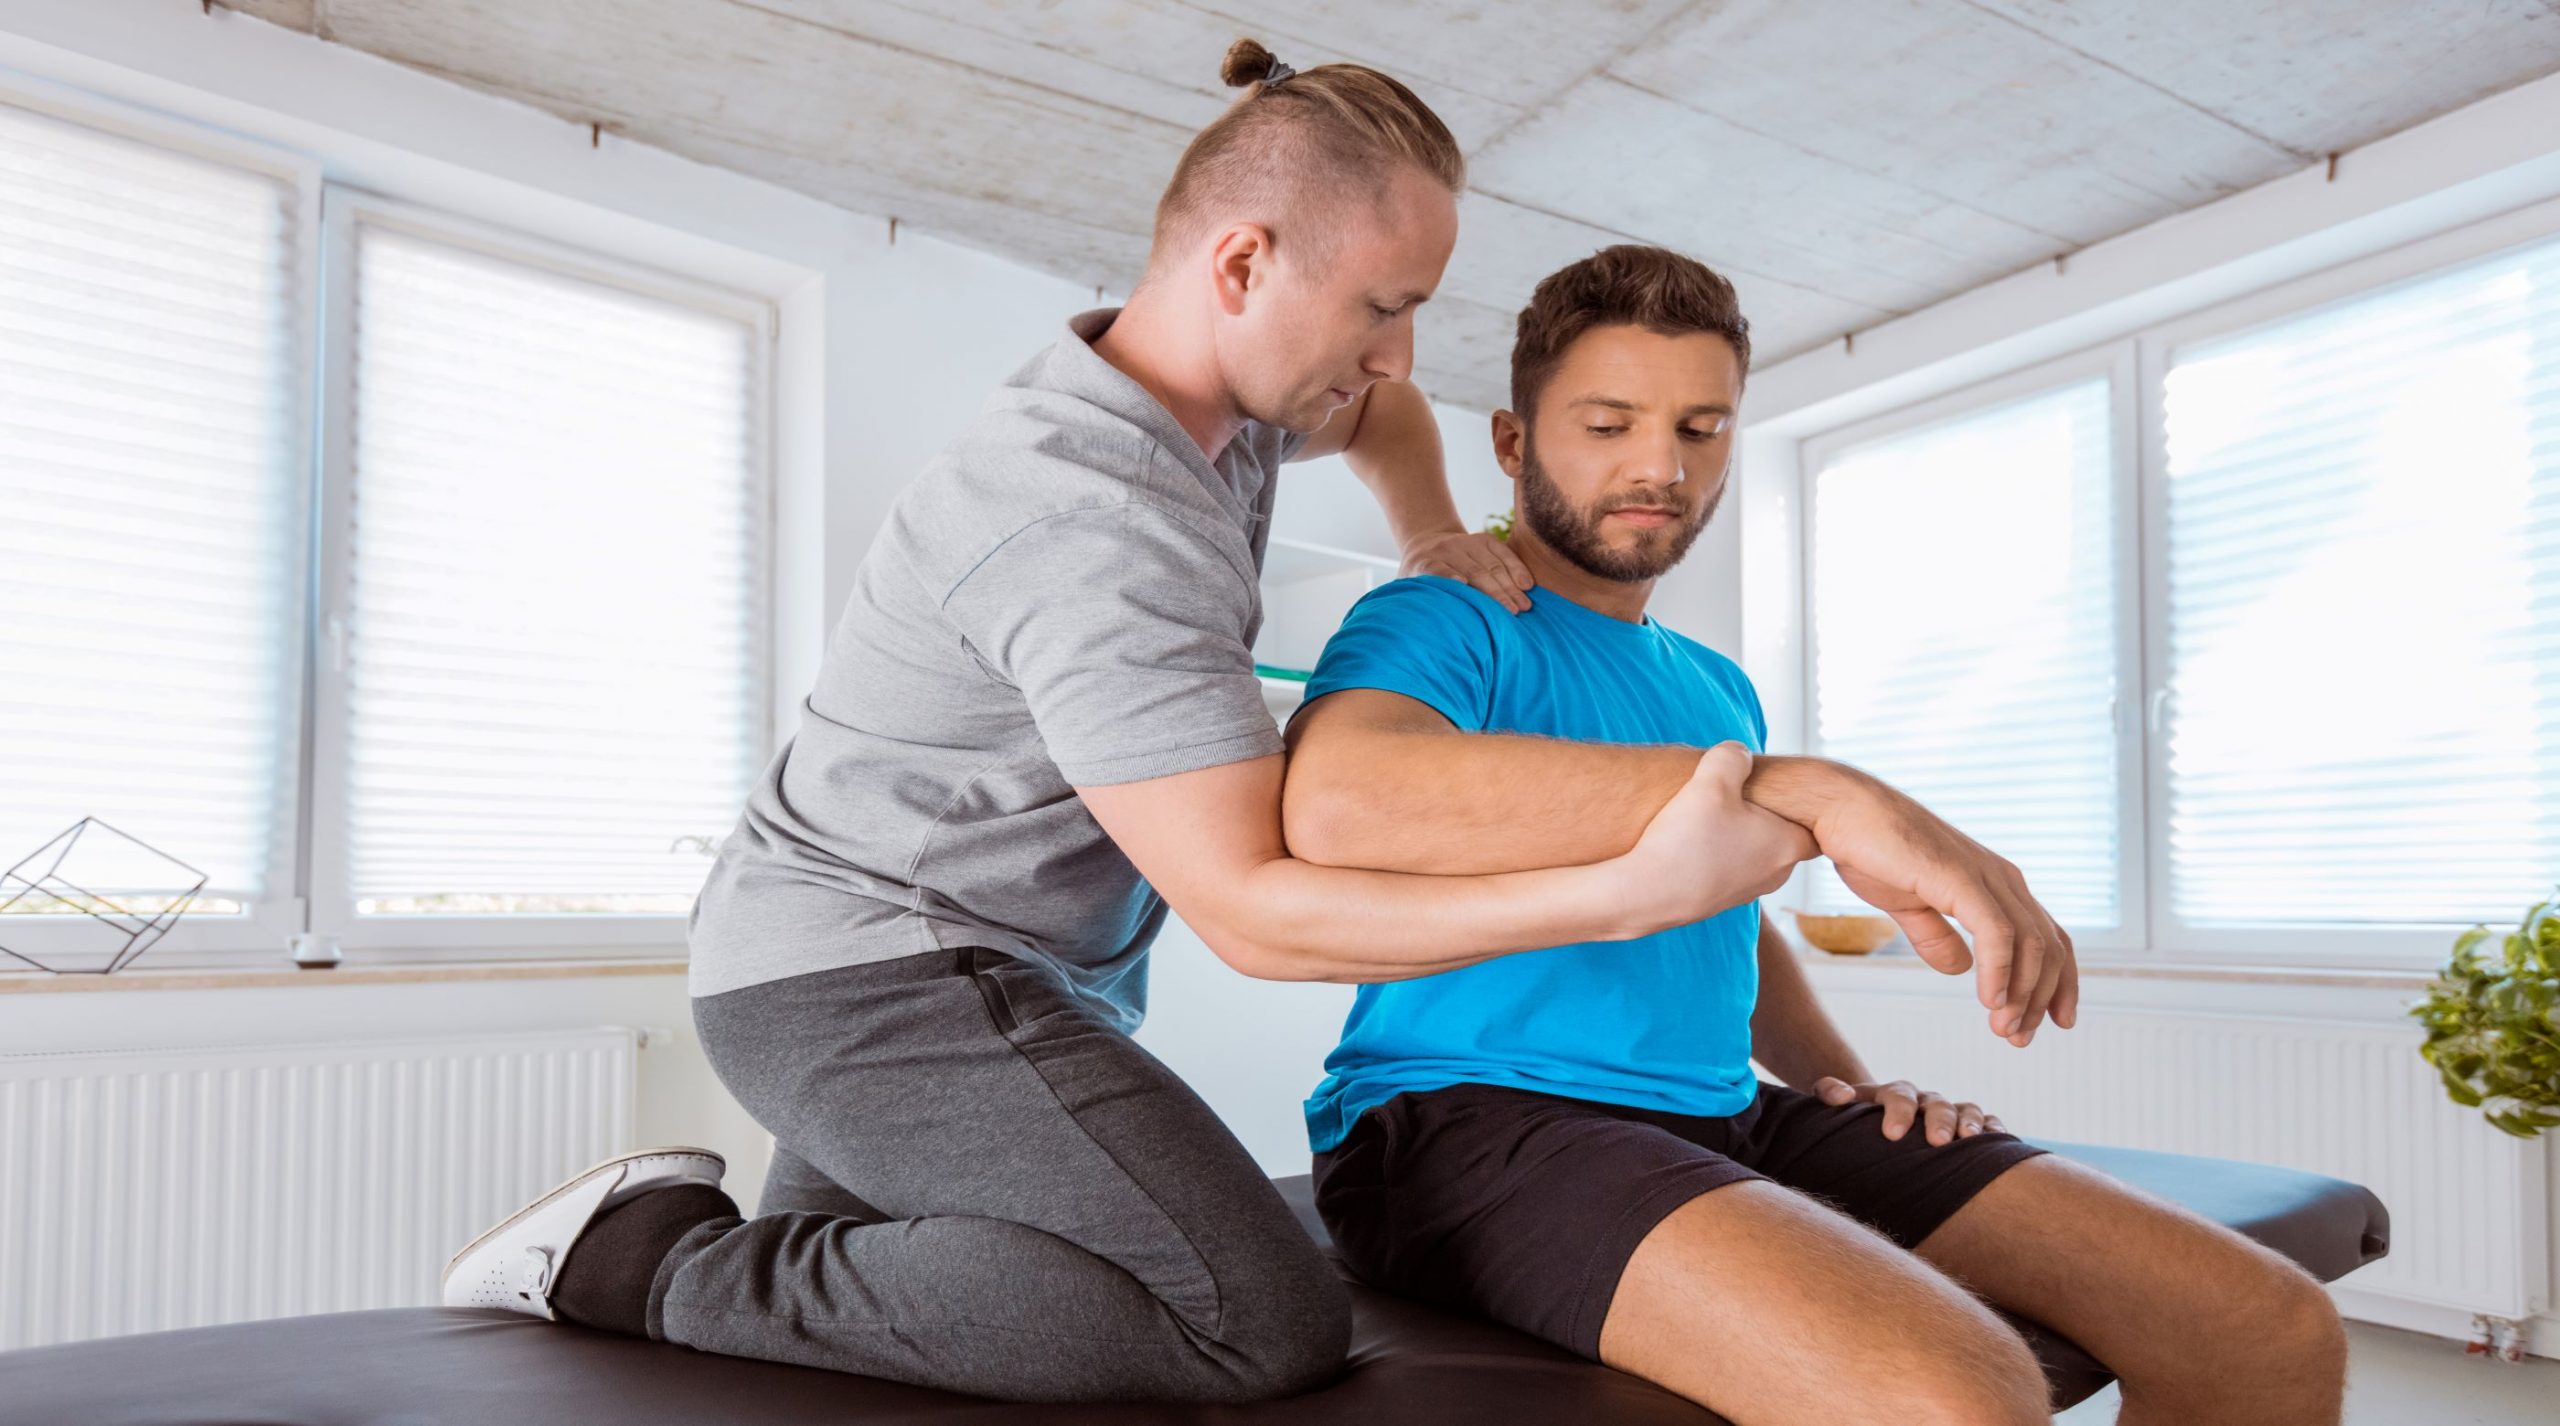 ProSport 2022 – Innovative Manual Therapy for Performance and Injury Prevention